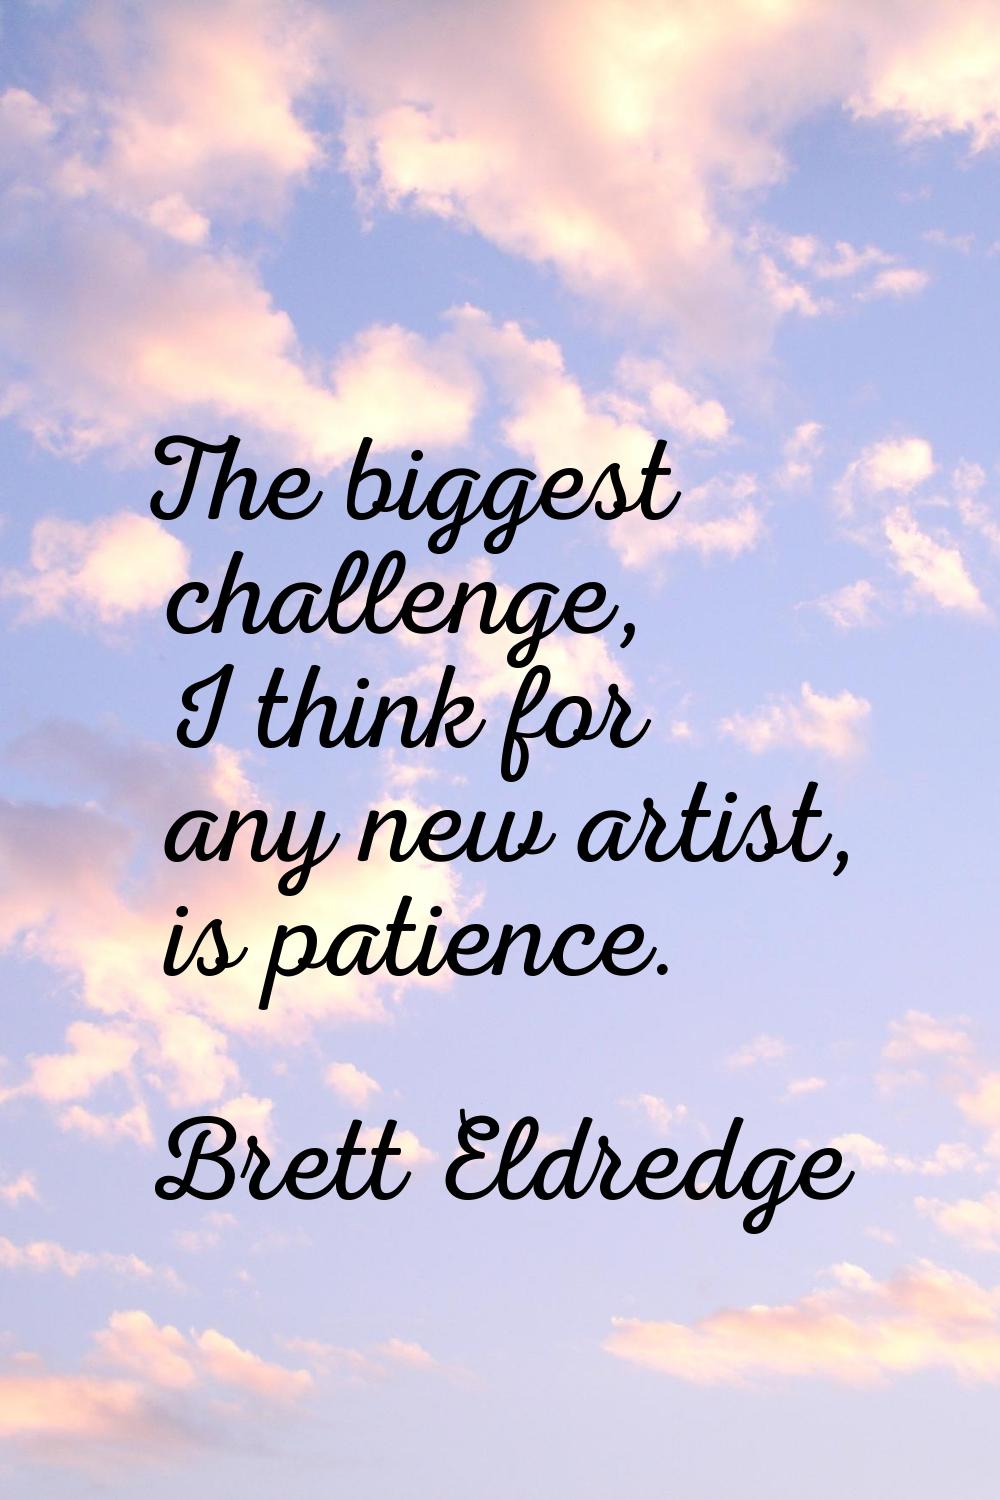 The biggest challenge, I think for any new artist, is patience.